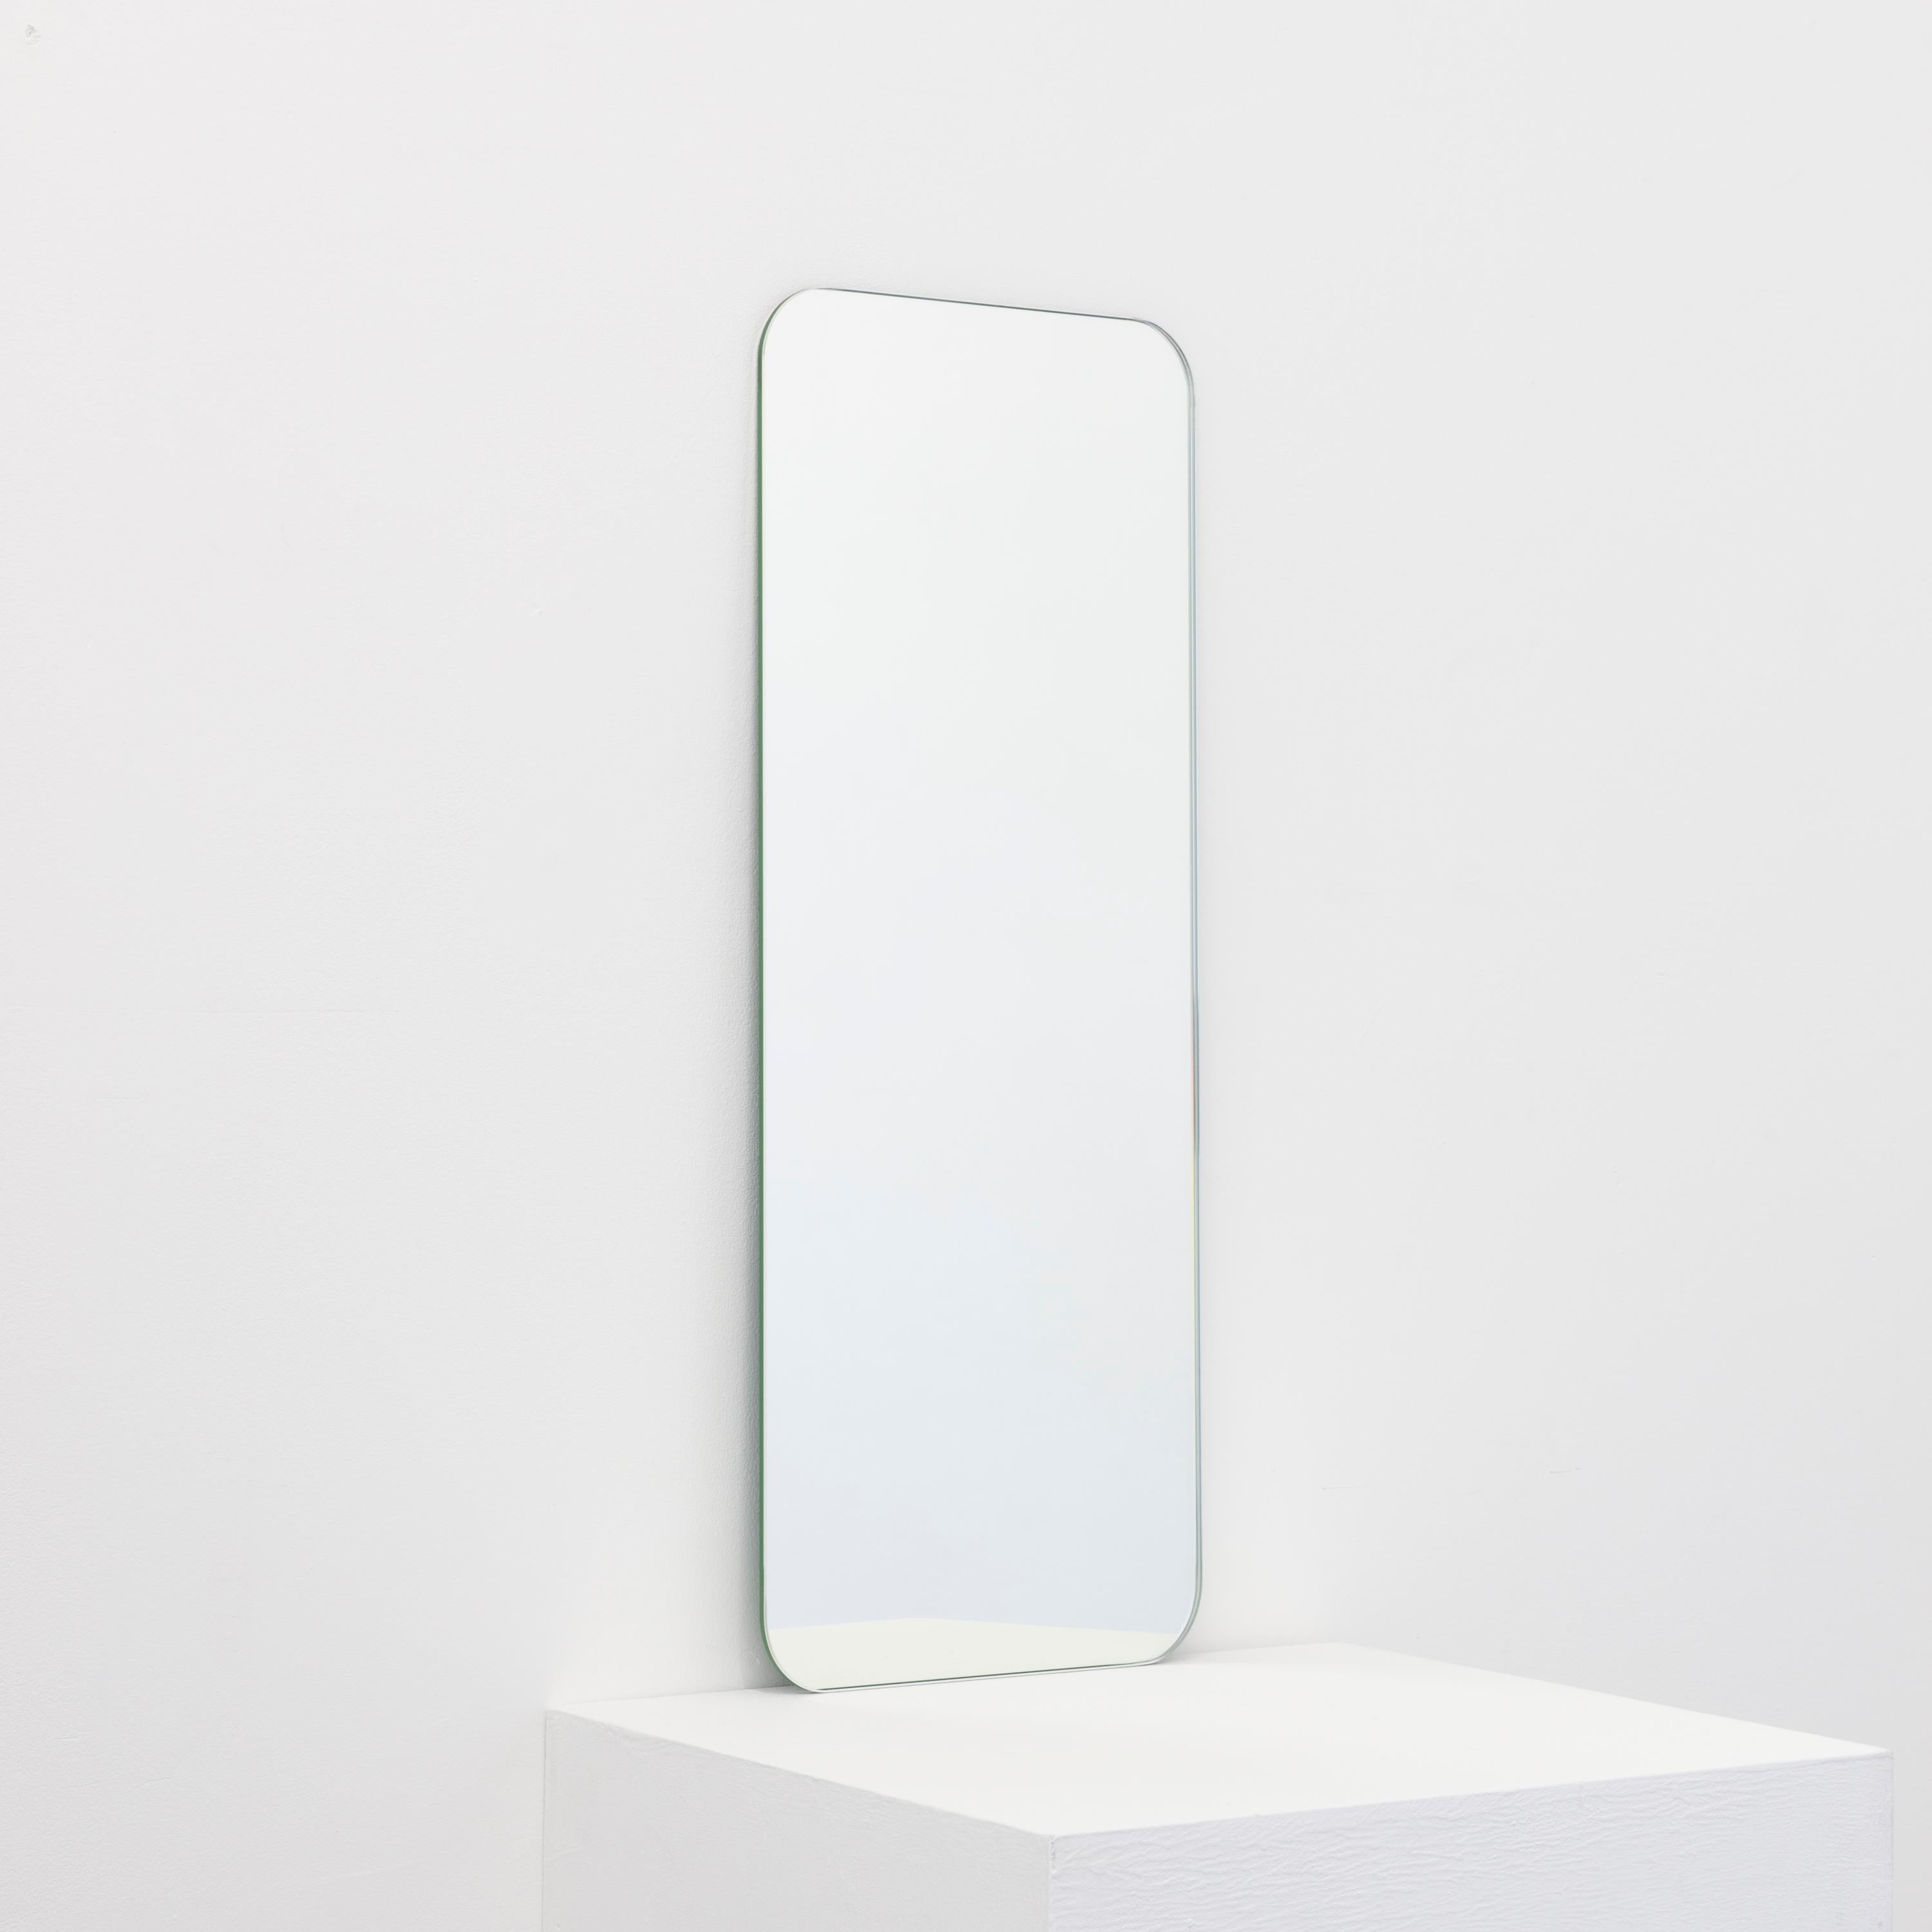 Minimalist Quadris™ rectangular shaped frameless mirror with a floating effect. Quality design that ensures the mirror sits perfectly parallel to the wall. Designed and made in London, UK.

Fitted with professional plates not visible once installed